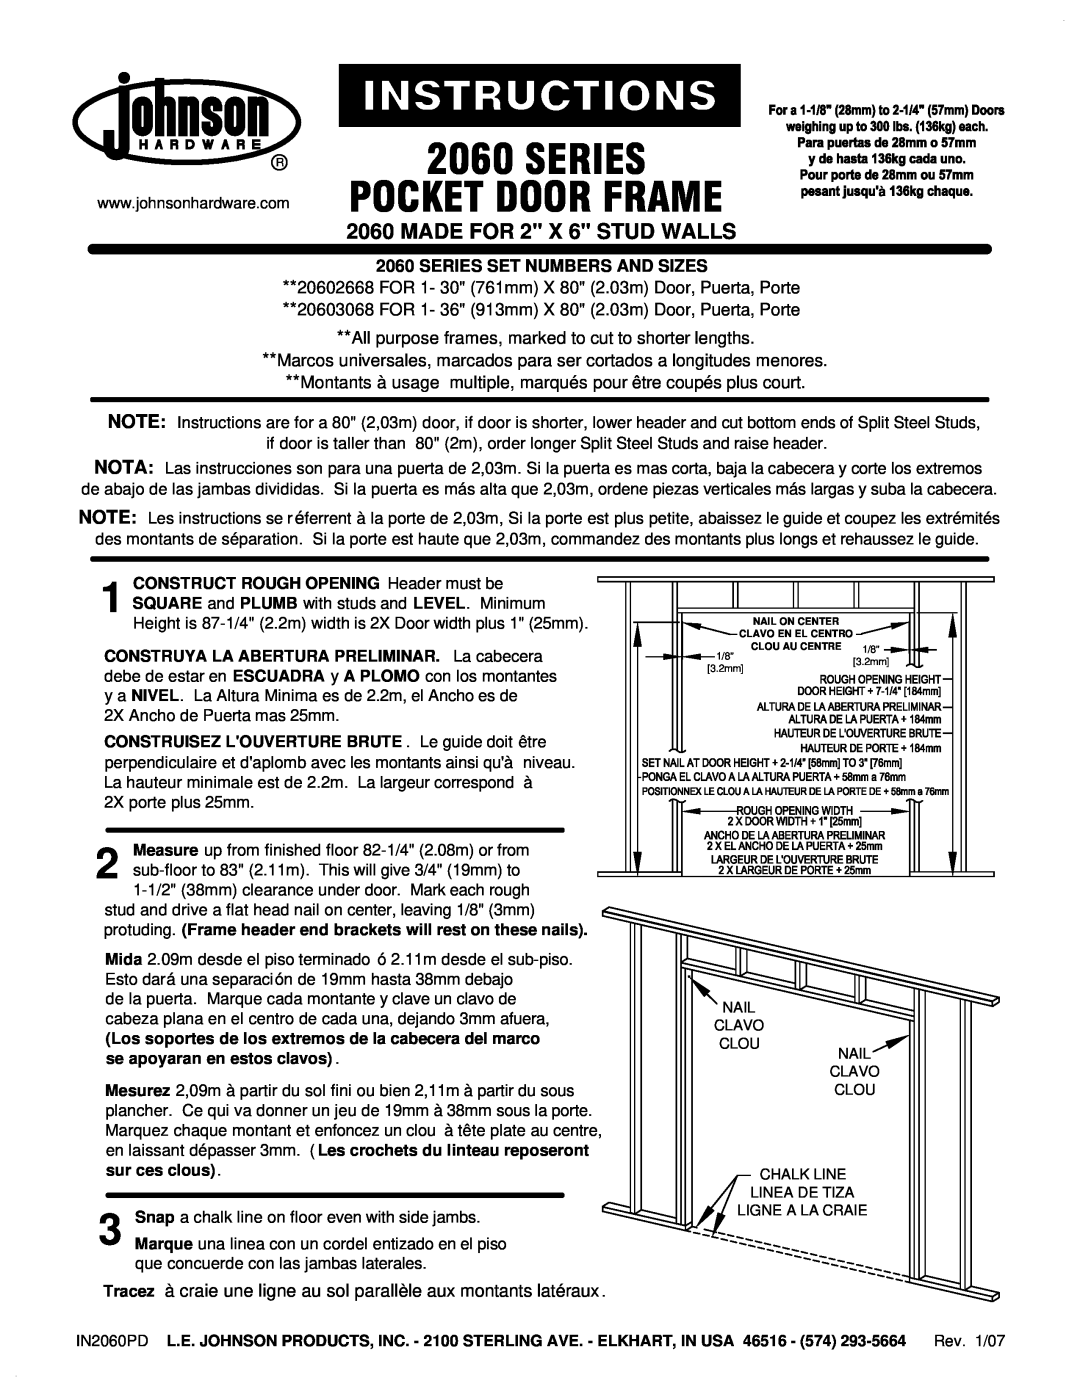 Johnson Hardware IN2060PD, 20602668 manual Pocket Door Frame, MADE FOR 2 X 6 STUD WALLS, Series Set Numbers And Sizes 